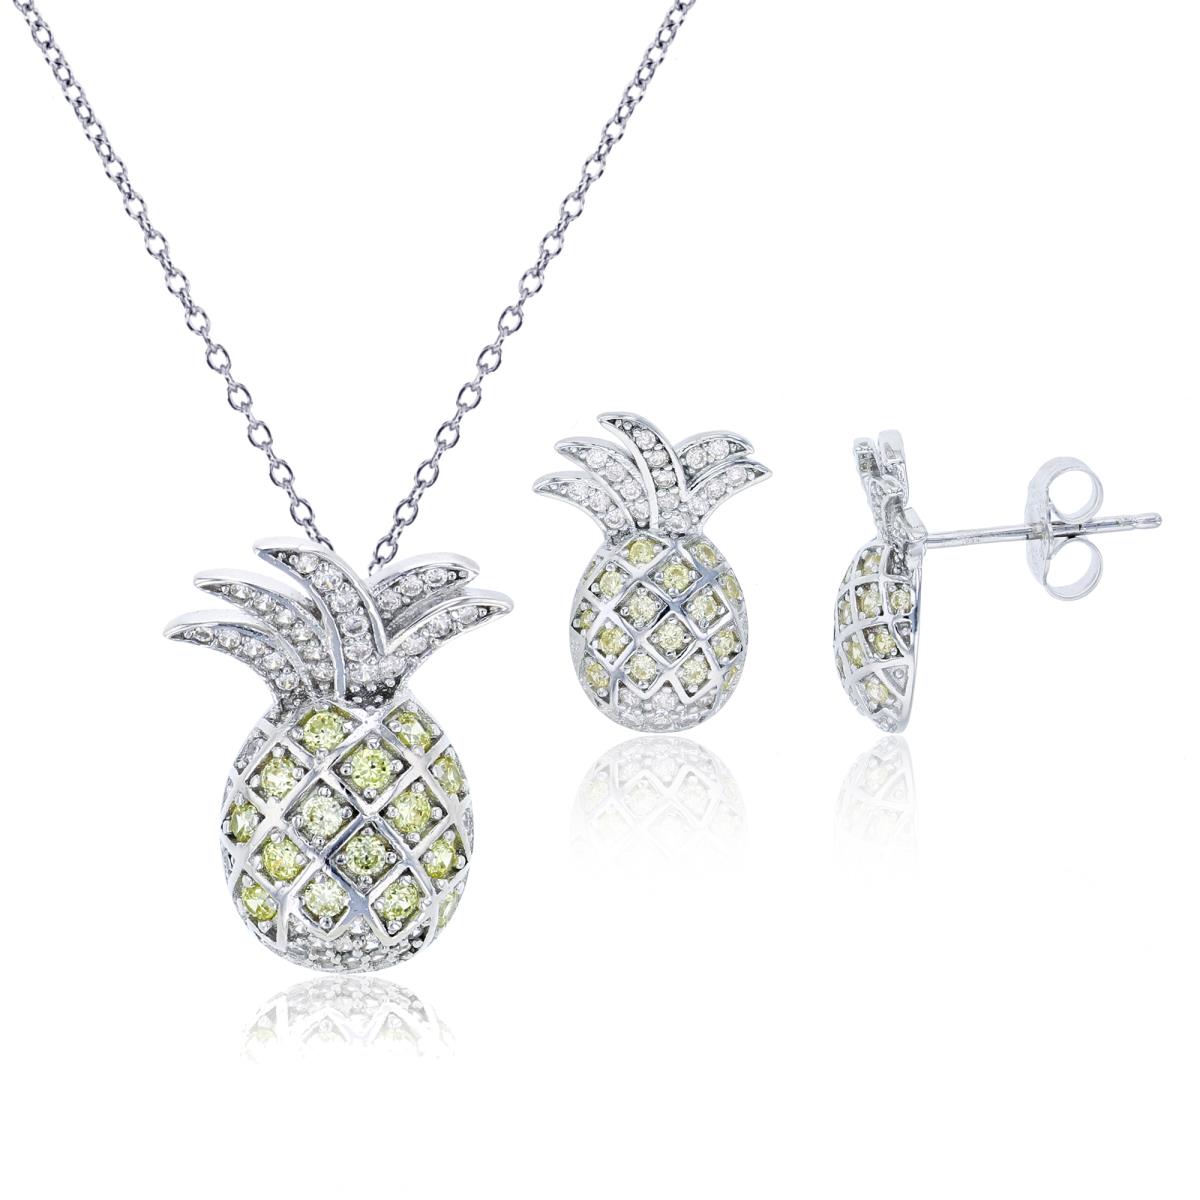 Sterling Silver Rhodium 21x15mm Yellow & White Rd CZ Pineapple 18" Necklace & Earring Set